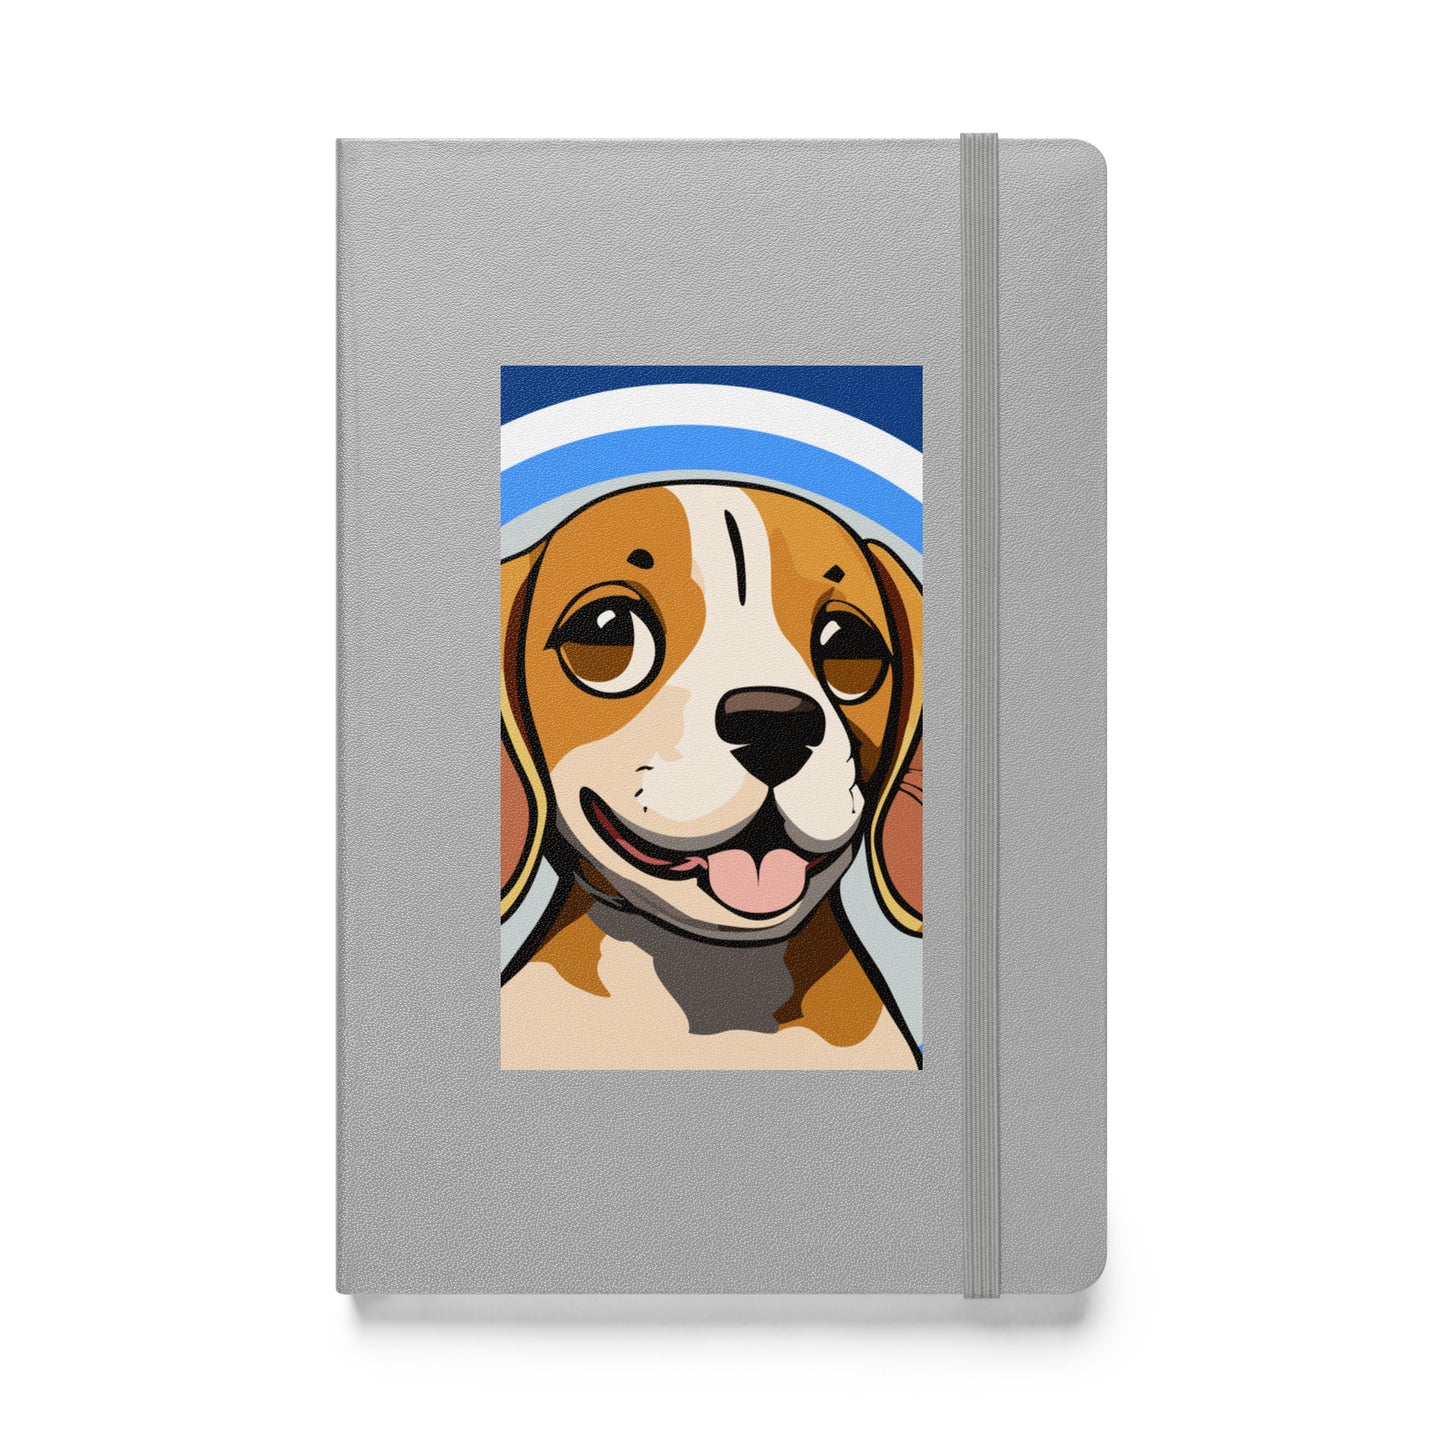 Hardcover notebook in silver color, with cute beagle on cover